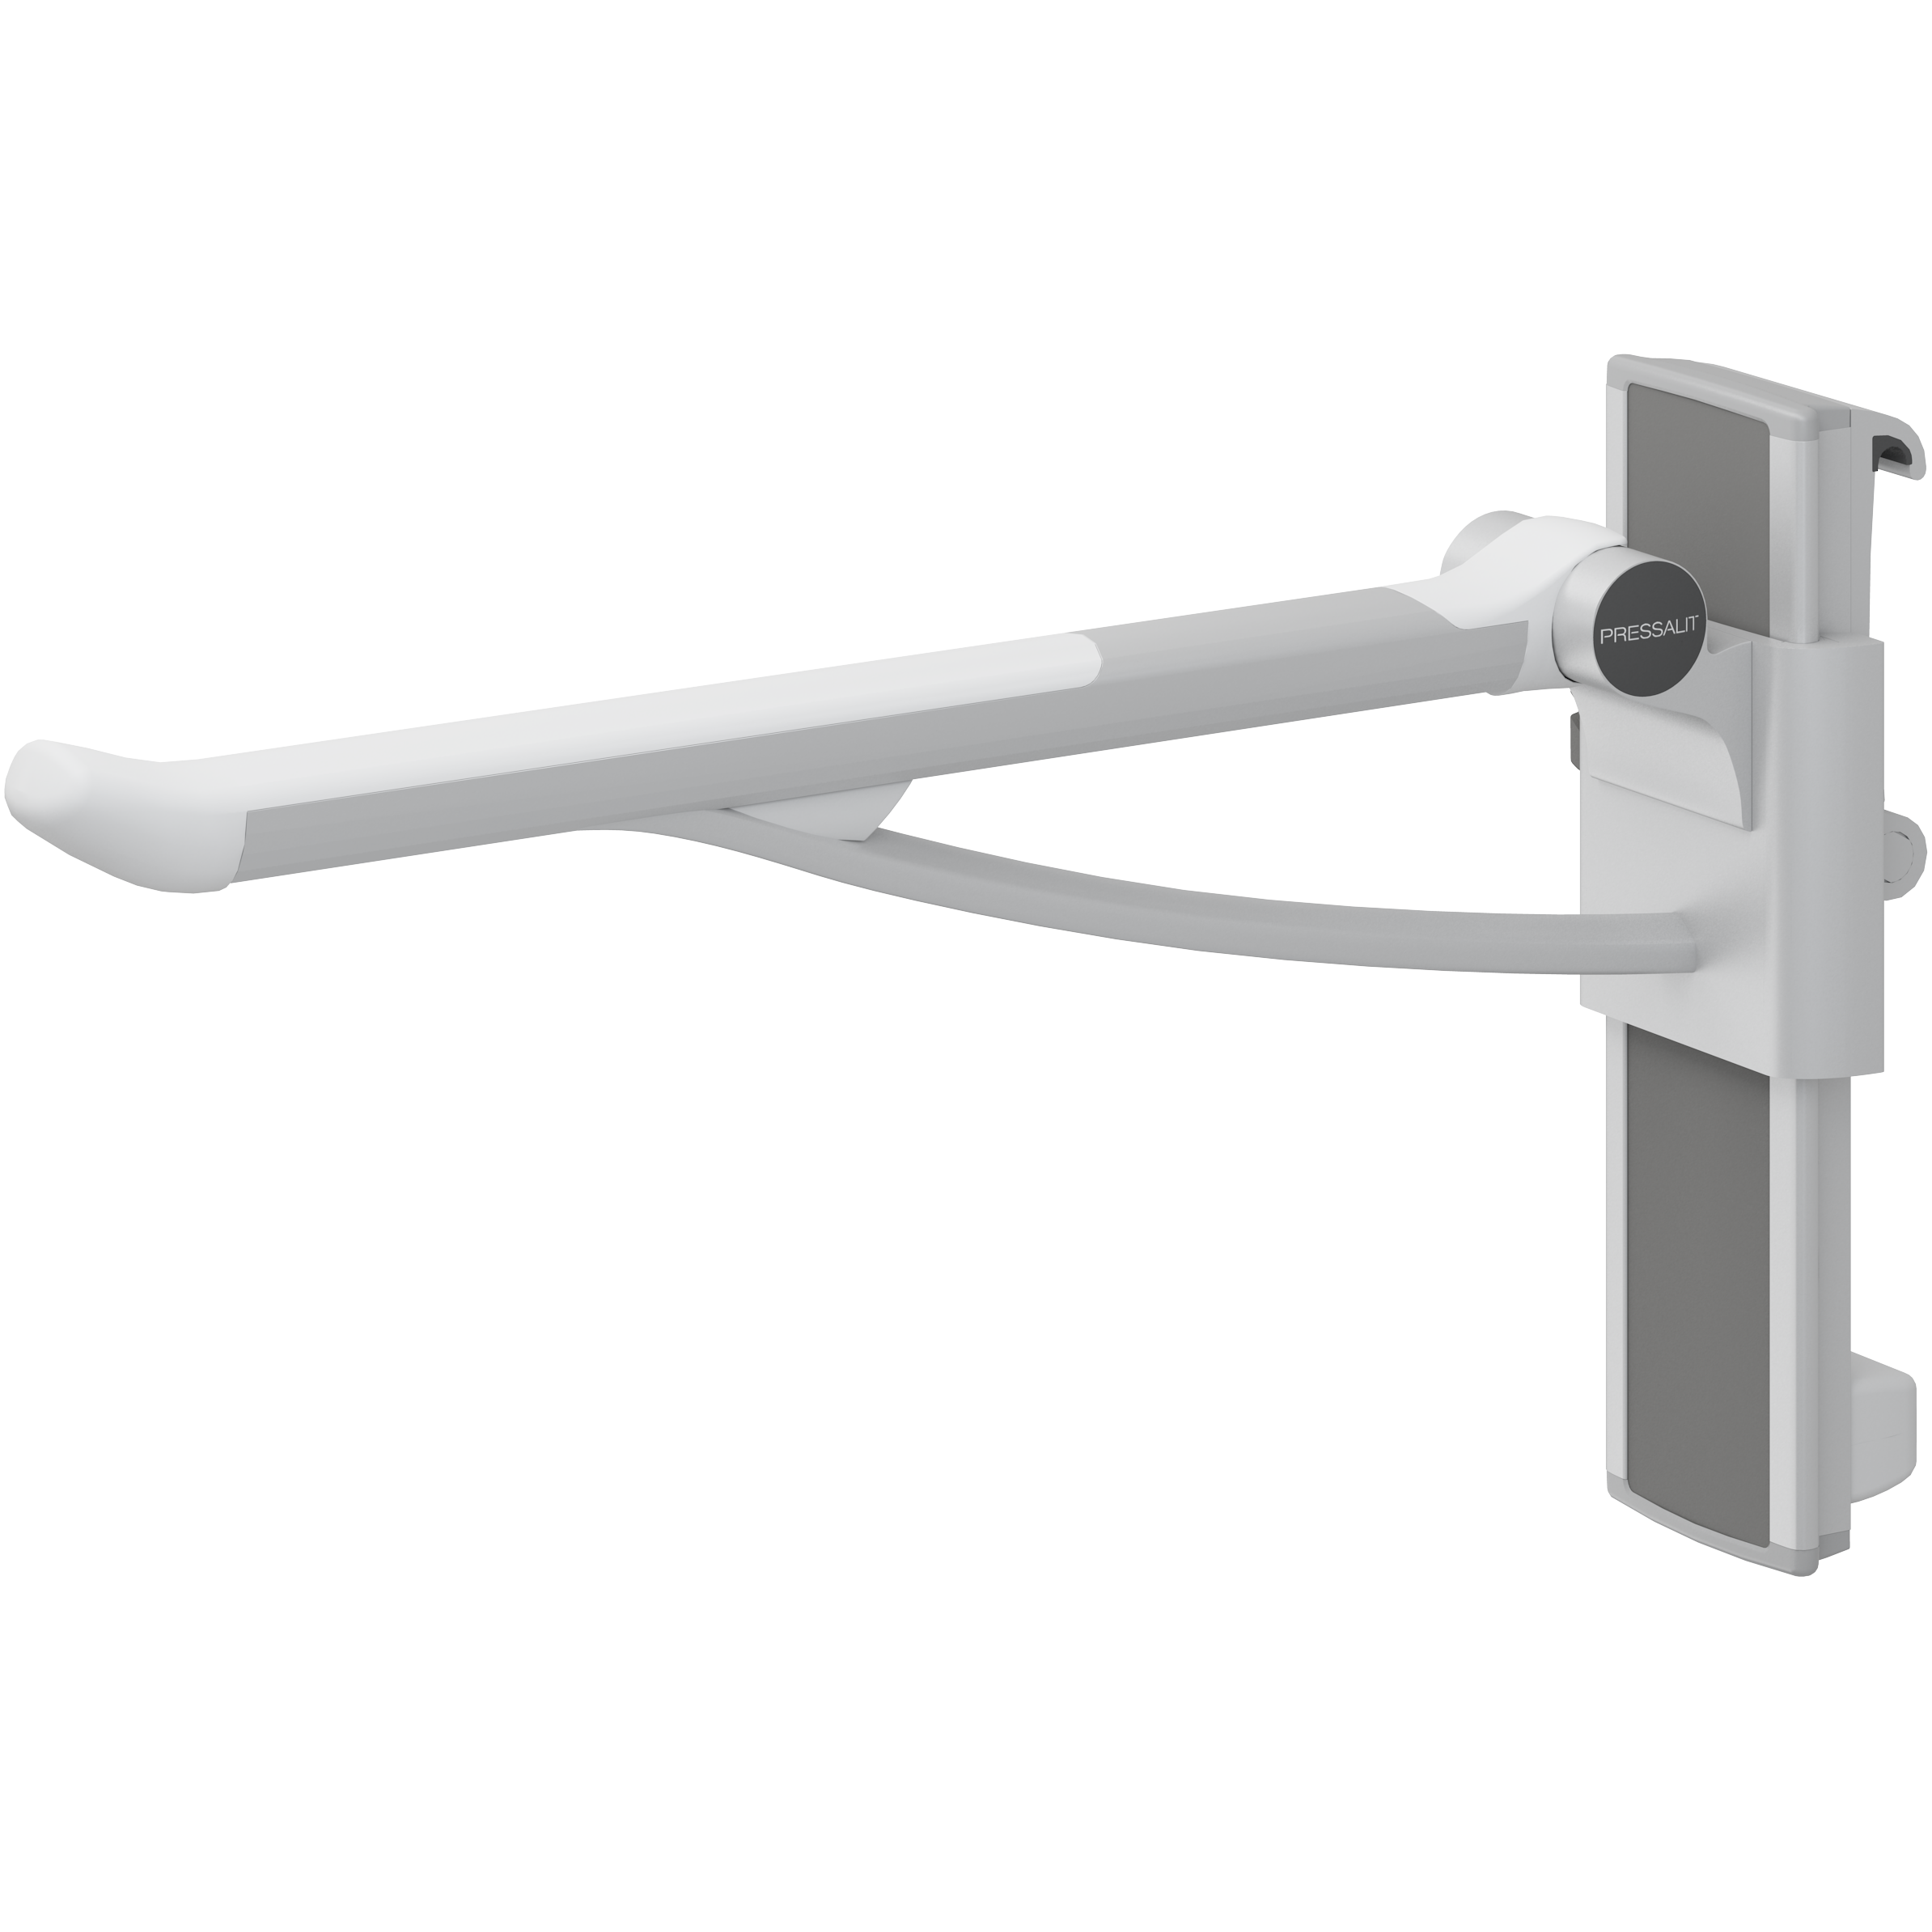 PLUS support arm, 700 mm, left hand operated